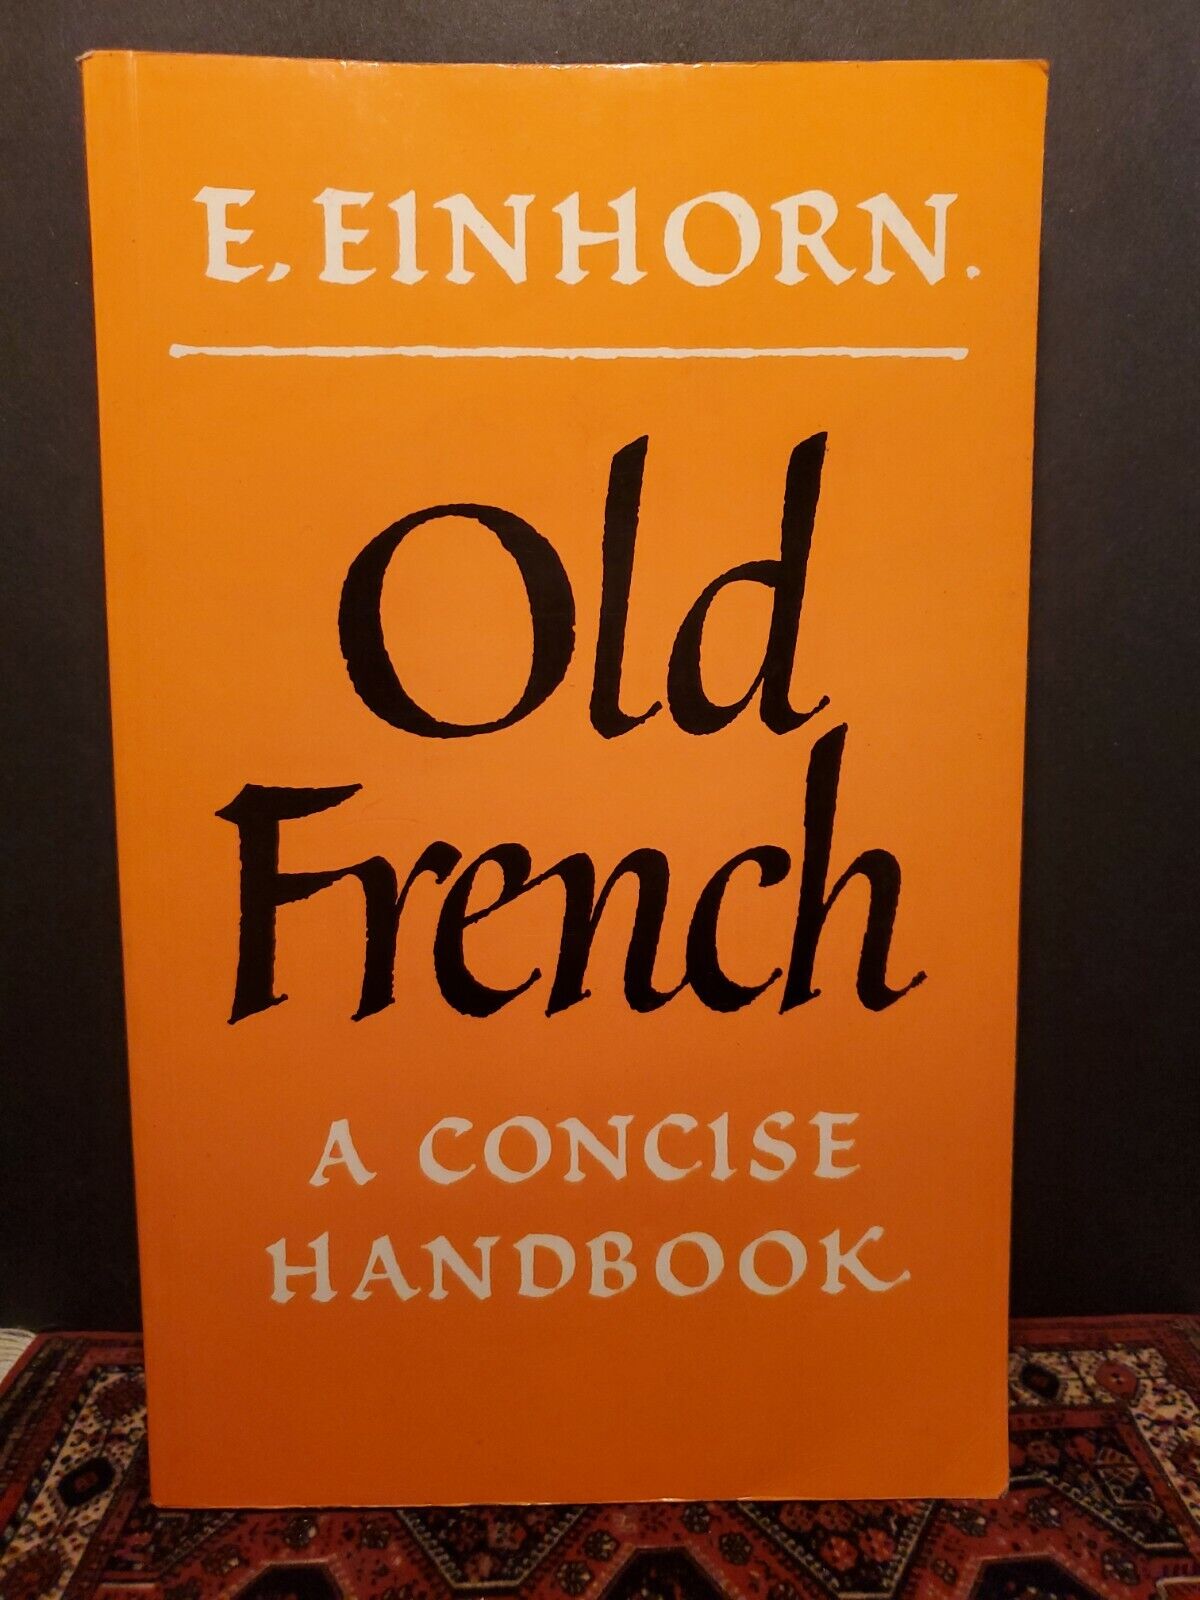 Old French : A Concise Handbook by E. C. Einhorn (1975, Trade Paperback)